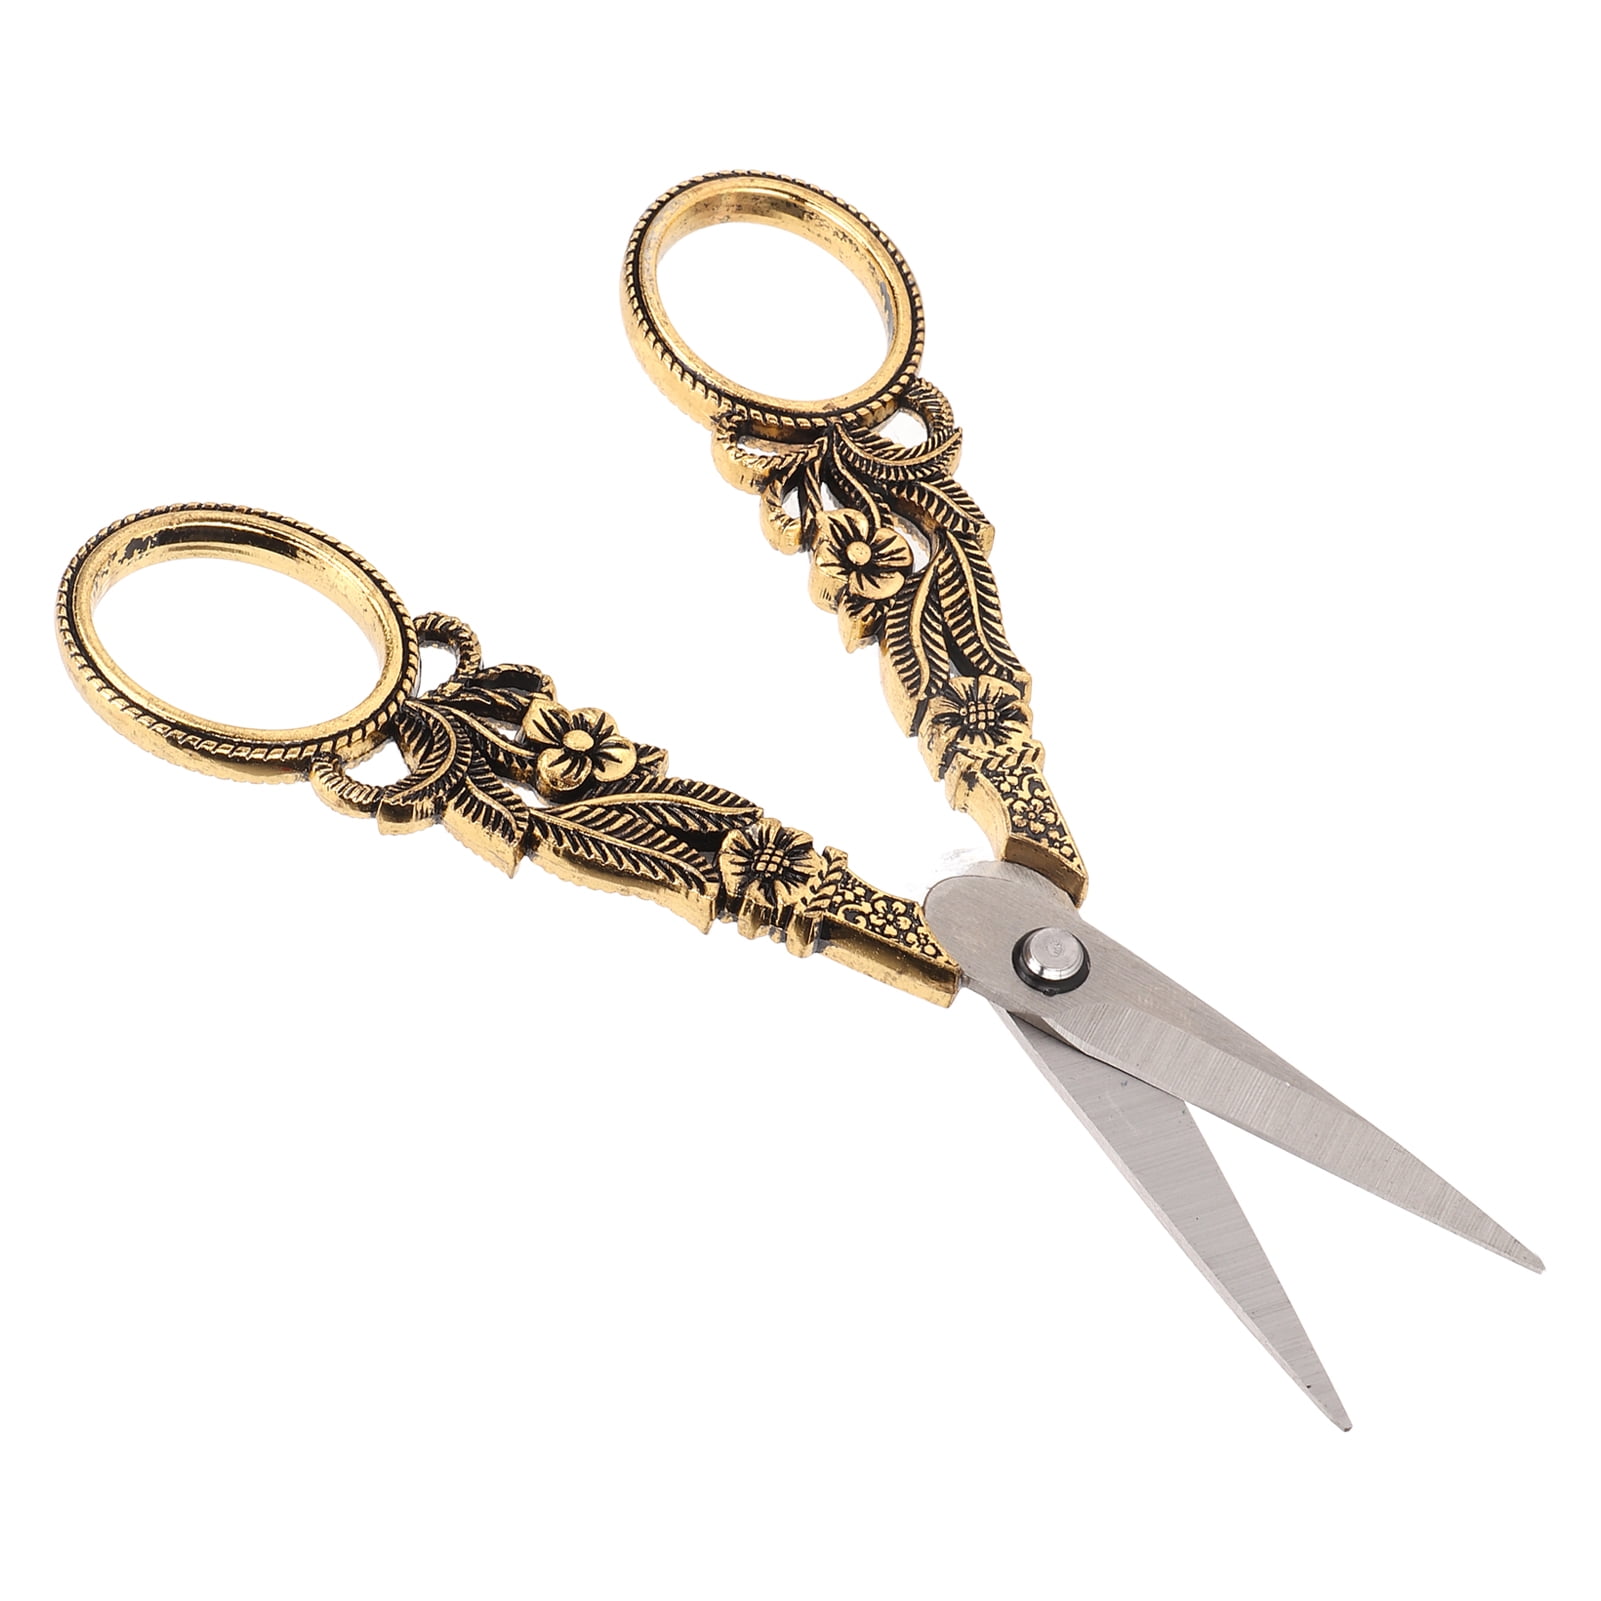 Embroidery Scissors Sewing Scissors - Small Embroidery Scissors with  Incisive Blades, Lightweight & Portable - Stainless Steel Scissors - DIY  Tools